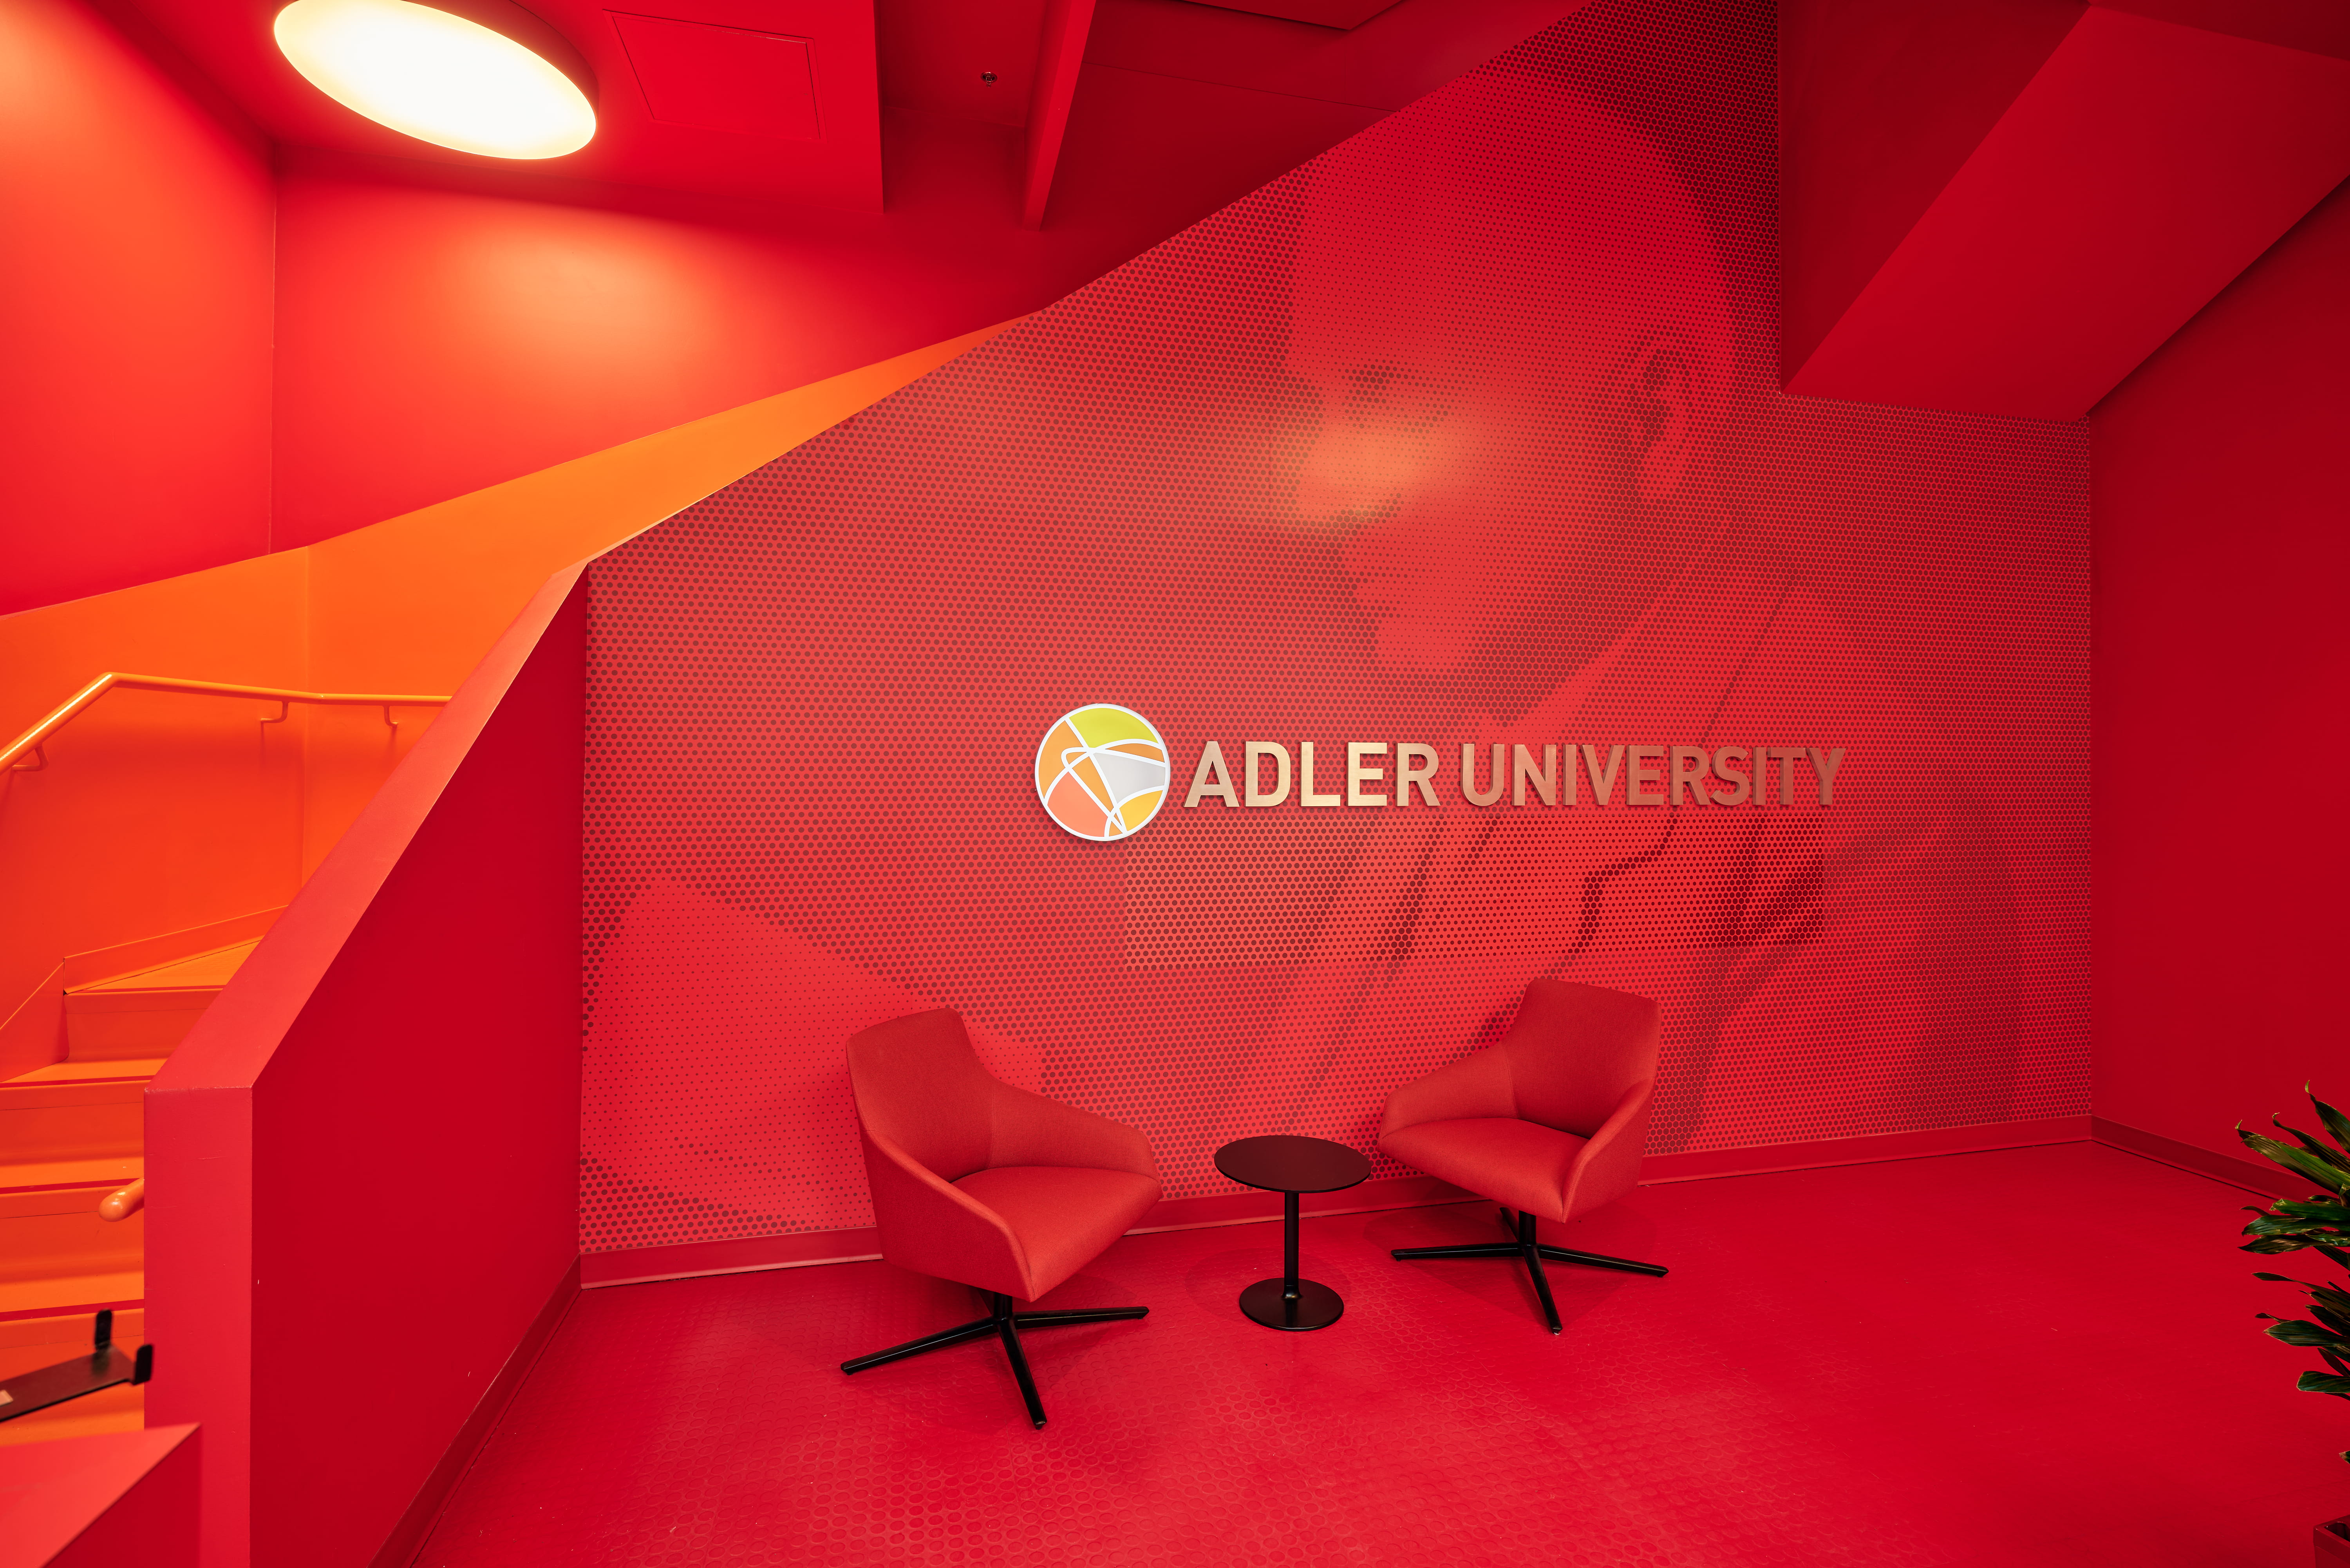 Adler University with globe word mark against bright red background -- image originally from the Vancouver Campus. 